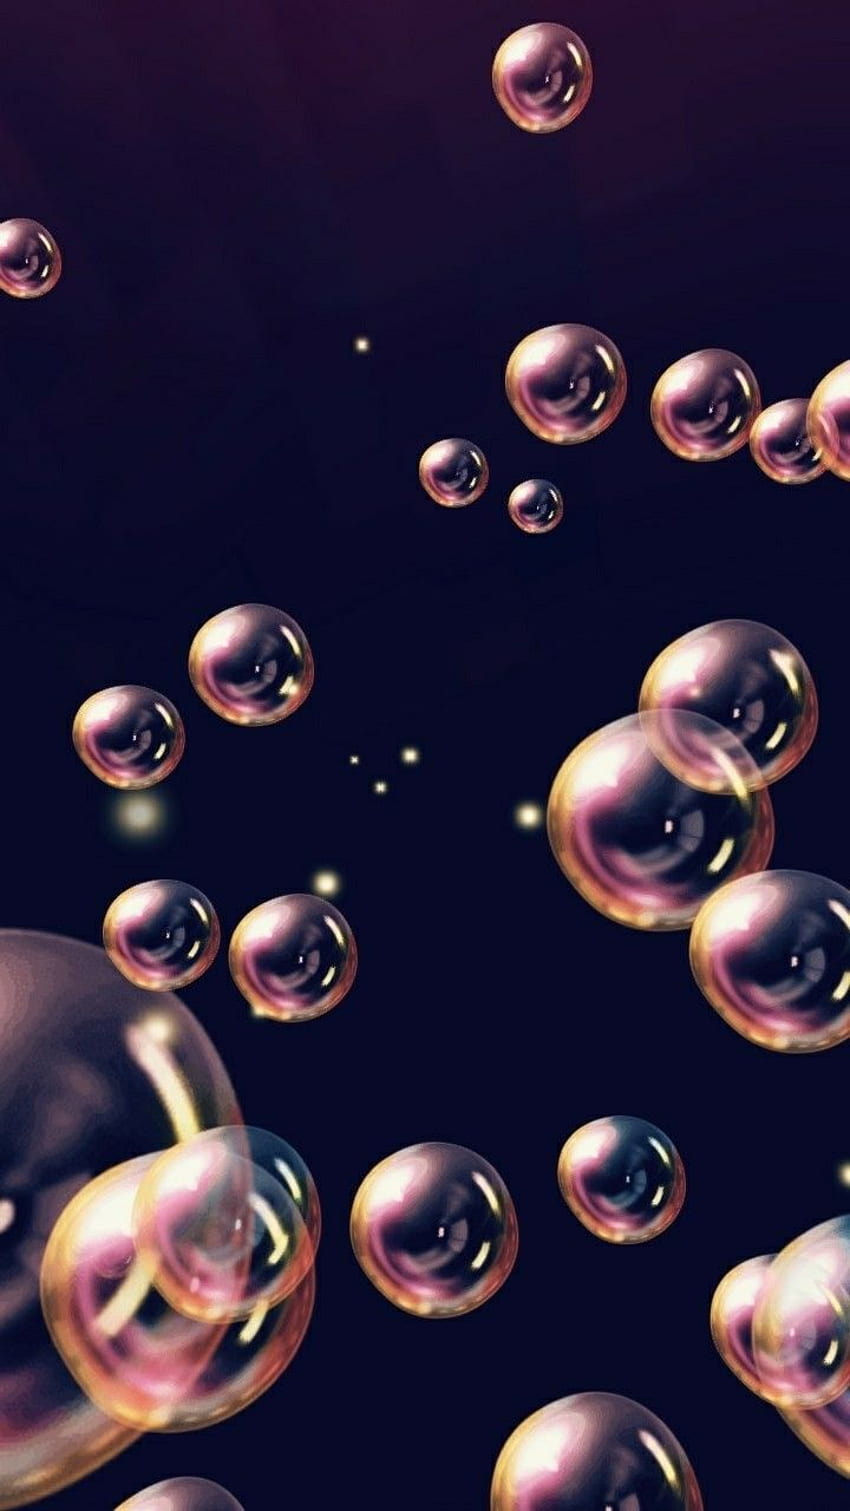 Bubble Wallpaper Images Browse 1337161 Stock Photos  Vectors Free  Download with Trial  Shutterstock